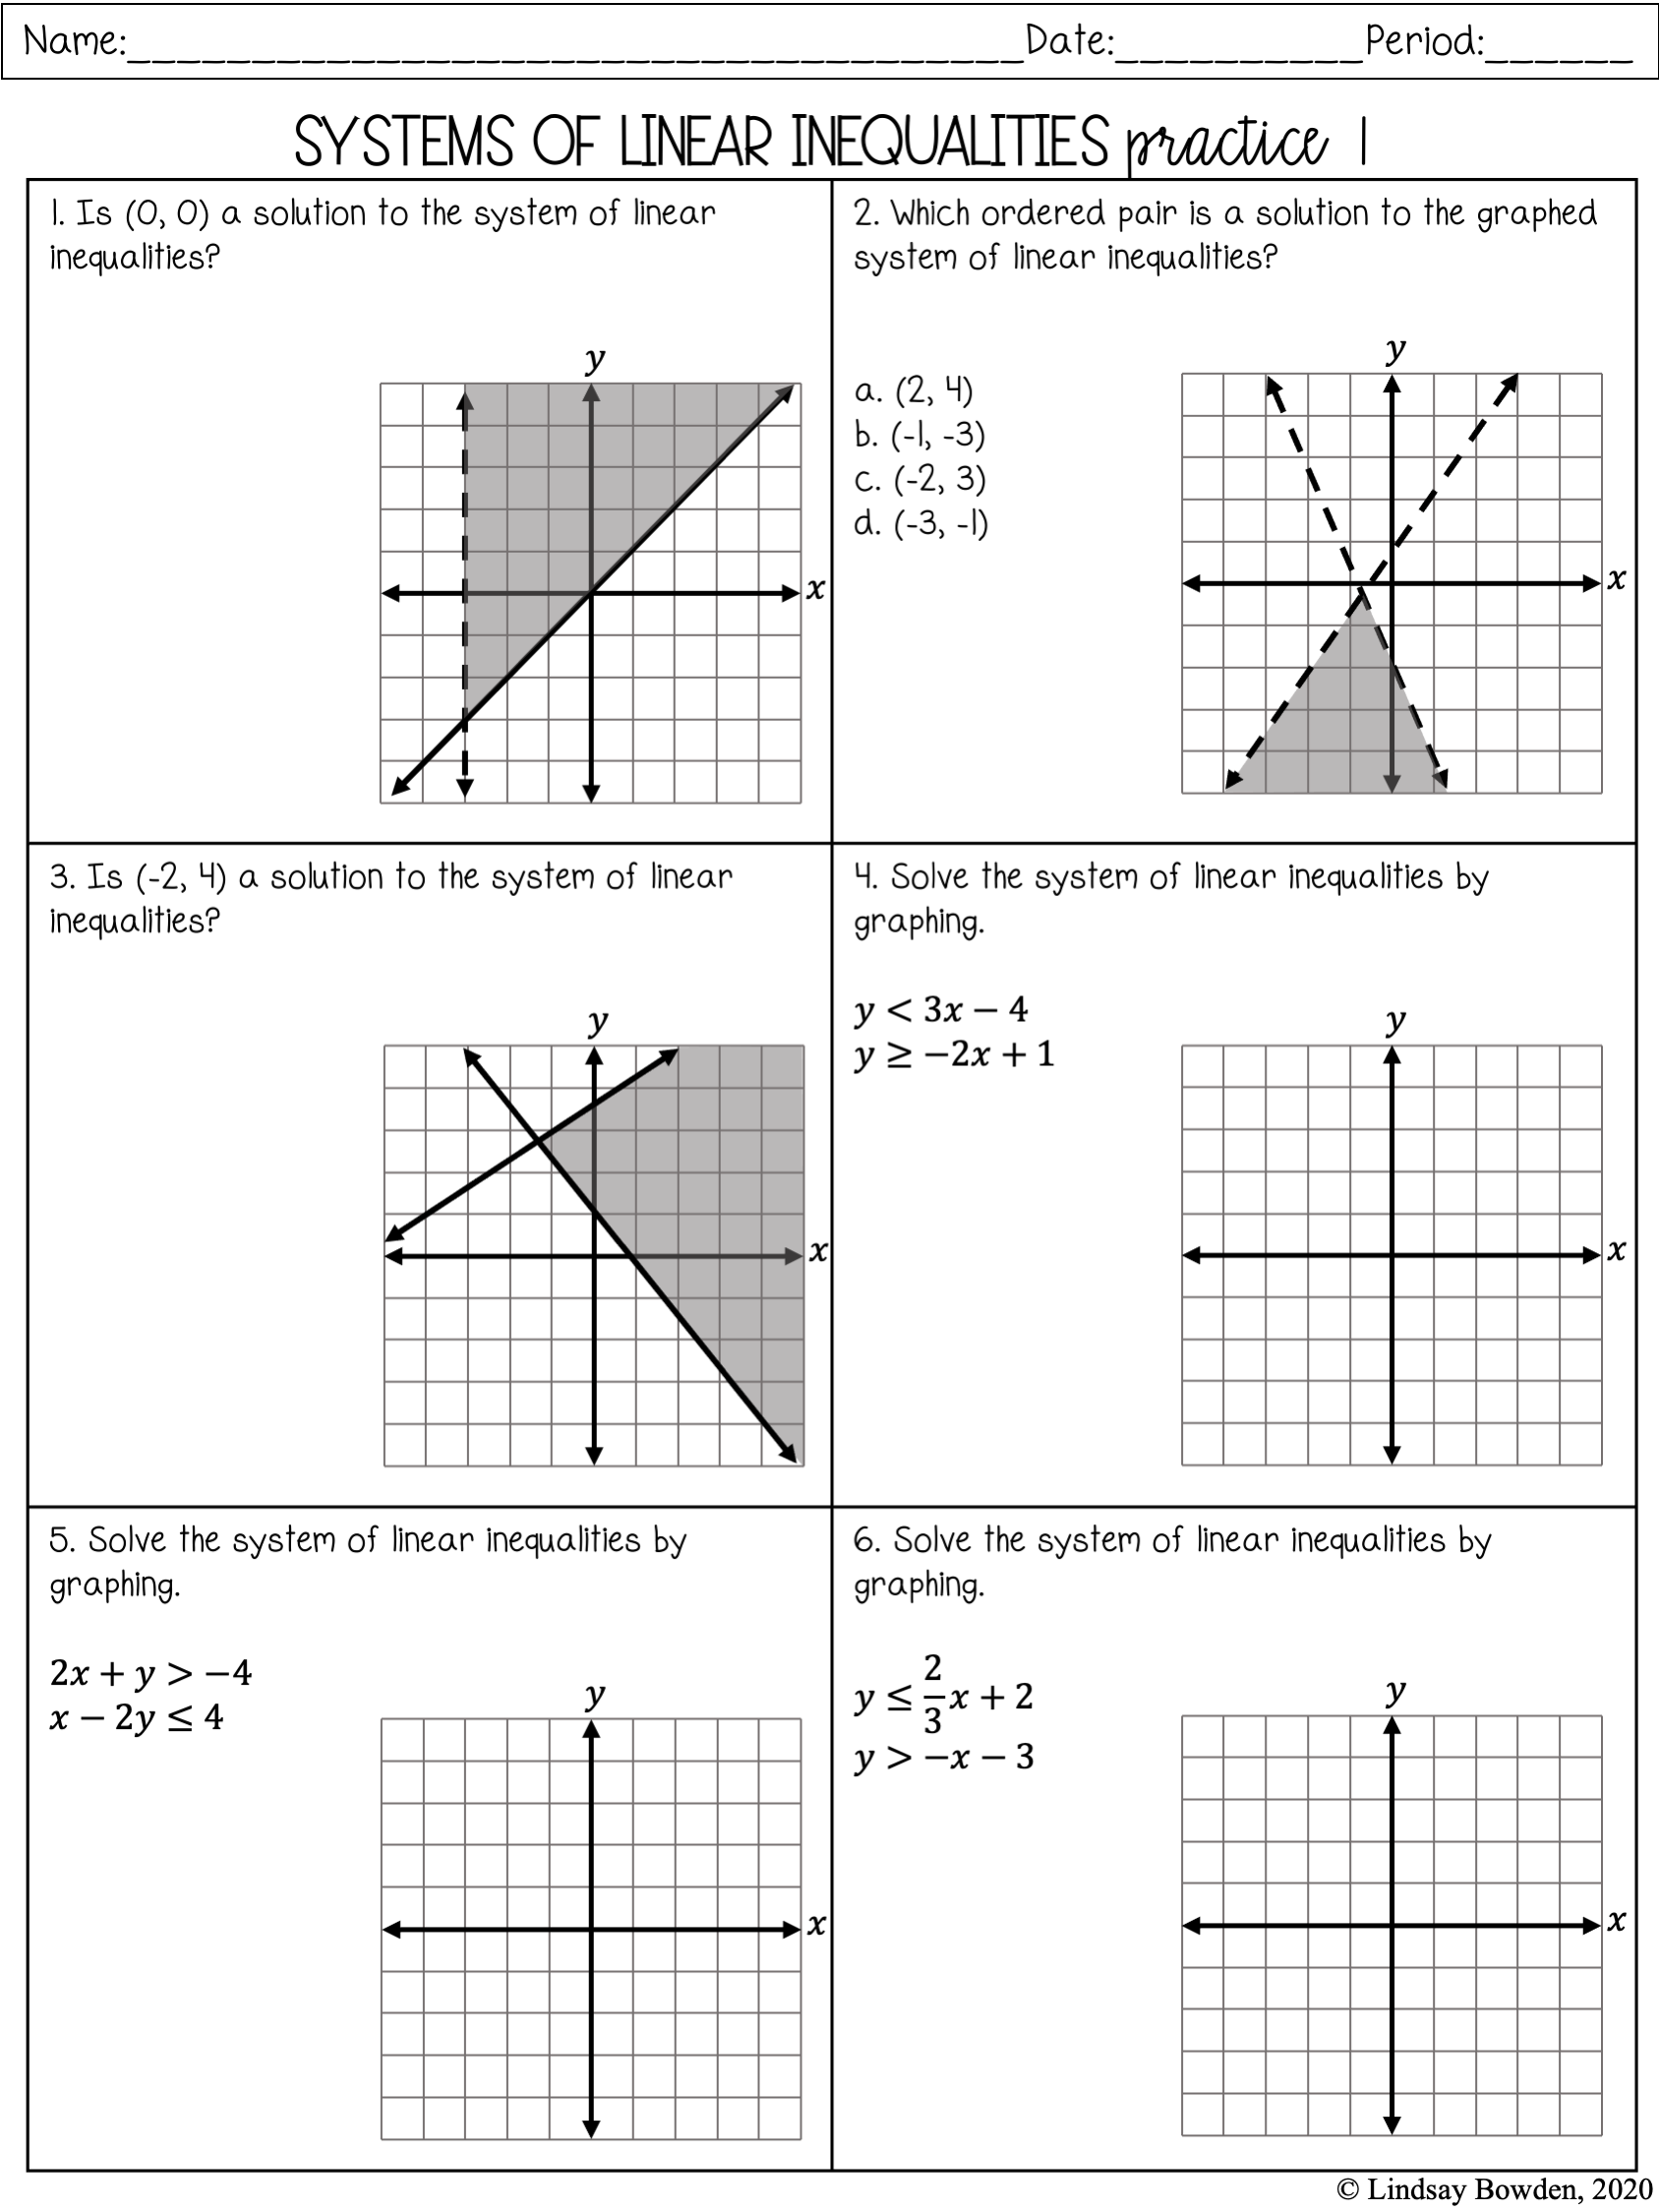 Linear Systems Notes and Worksheets - Lindsay Bowden With Systems Of Inequalities Worksheet